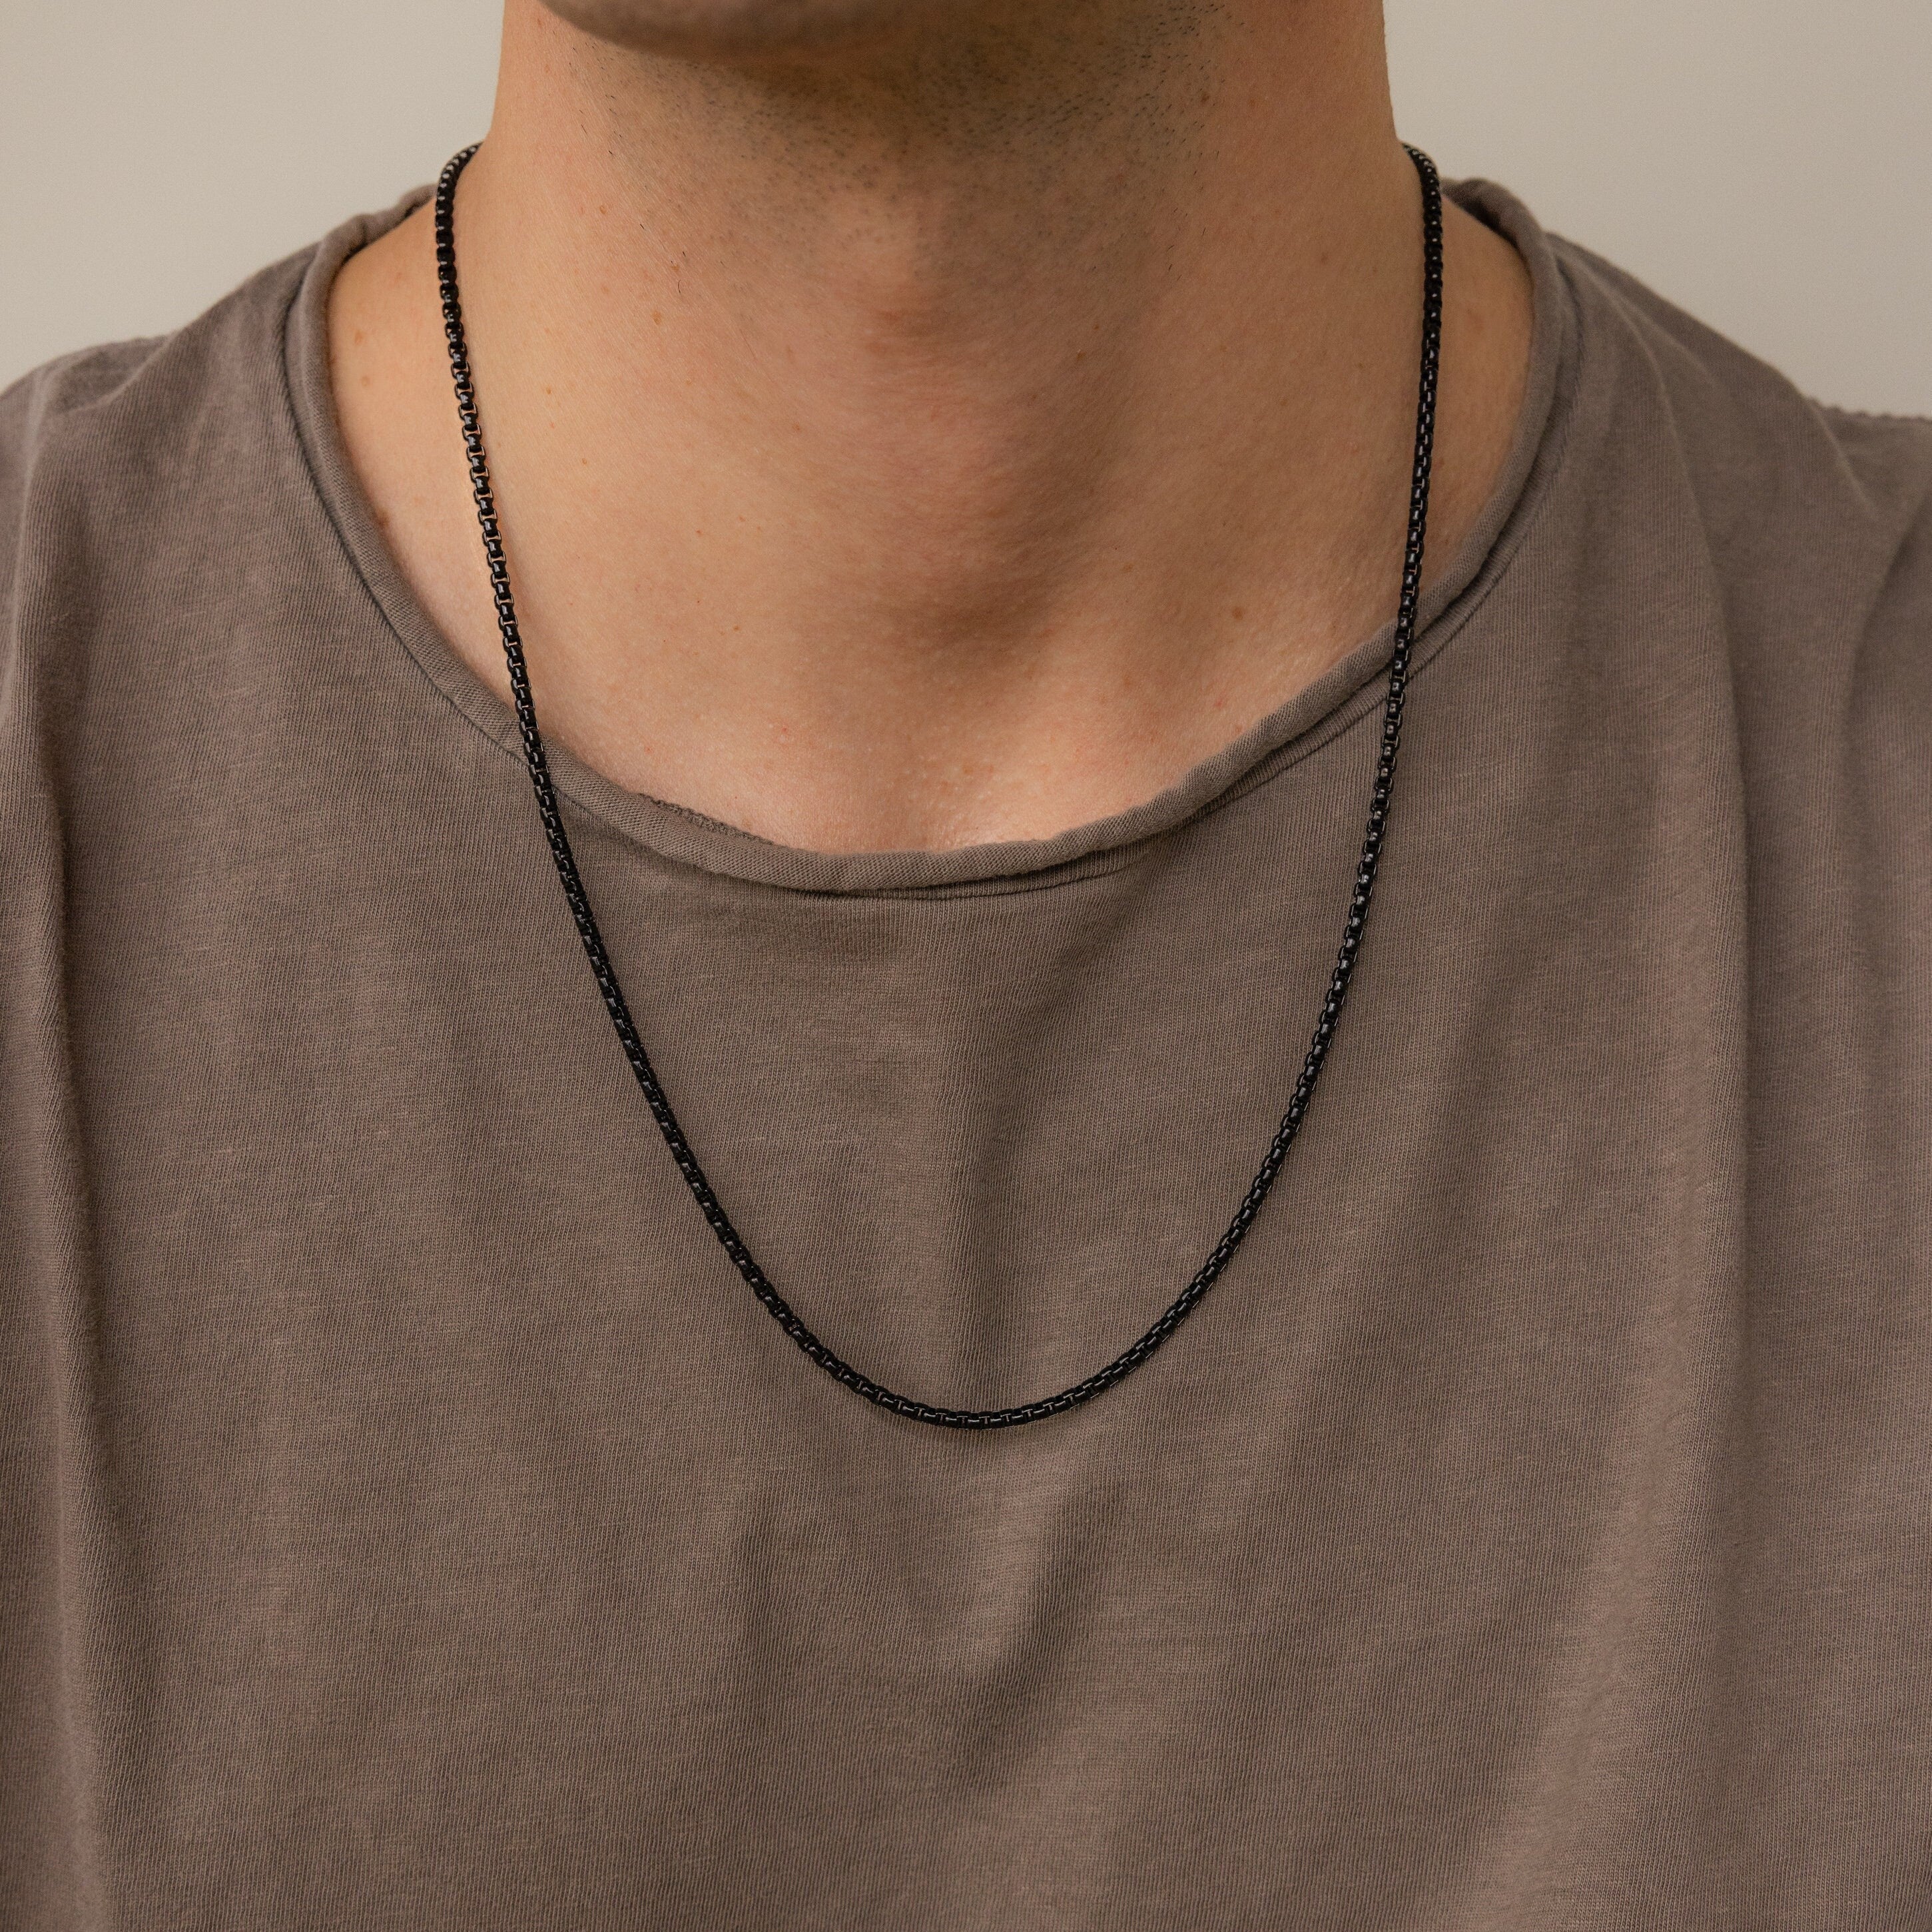 2 mm Black Chain Necklace | In stock! | Lucleon